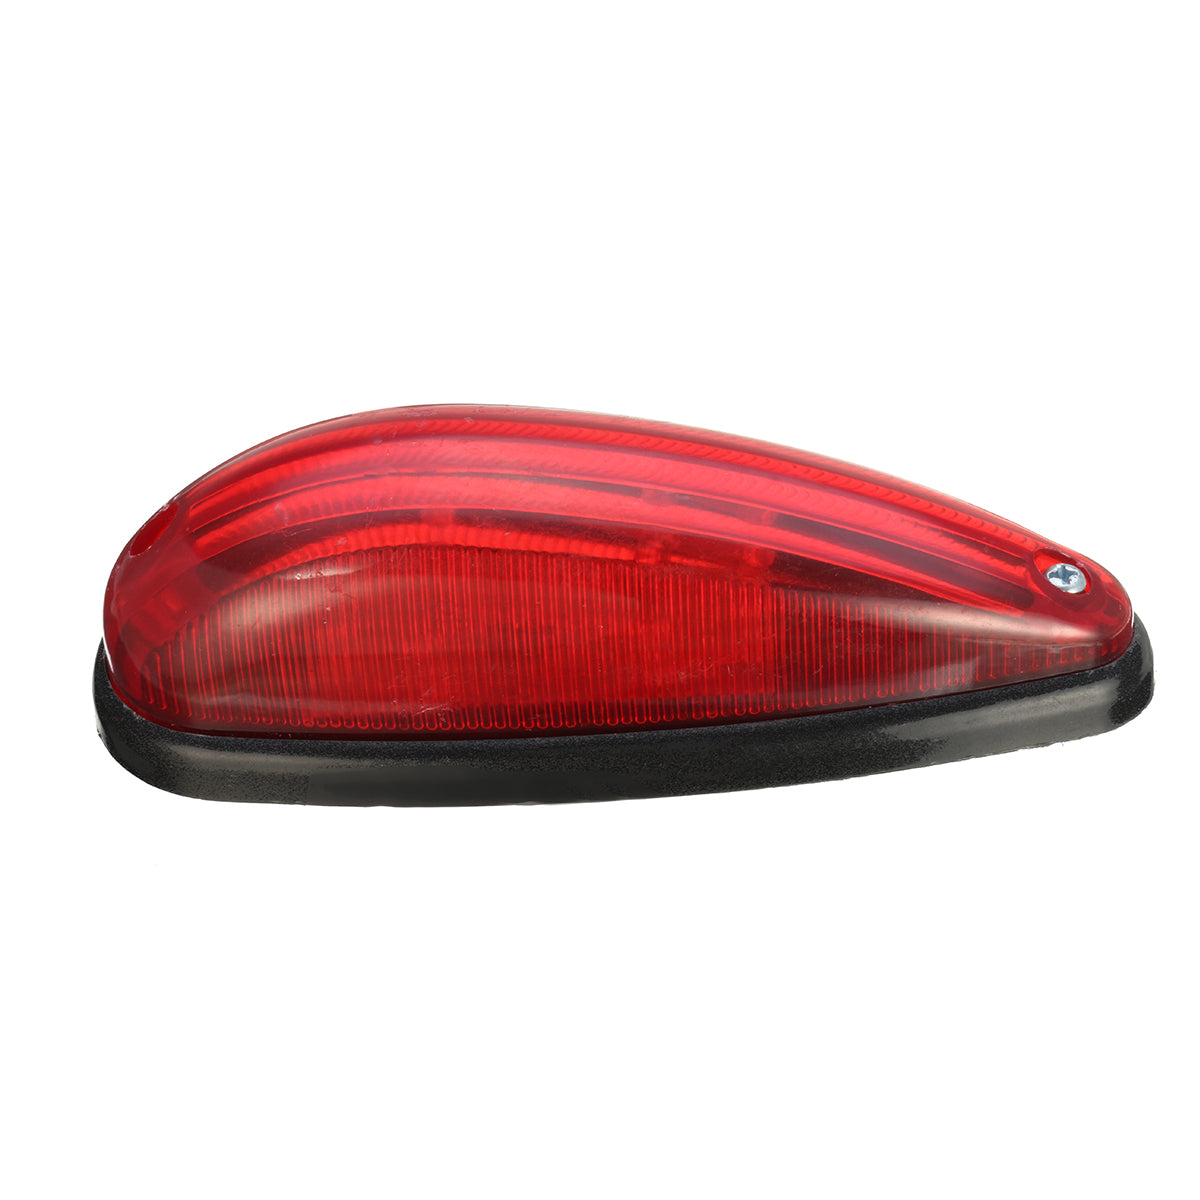 Firebrick 6 Inches 10 LED Car Tail Light Side Marker Lamp for Truck Tailer